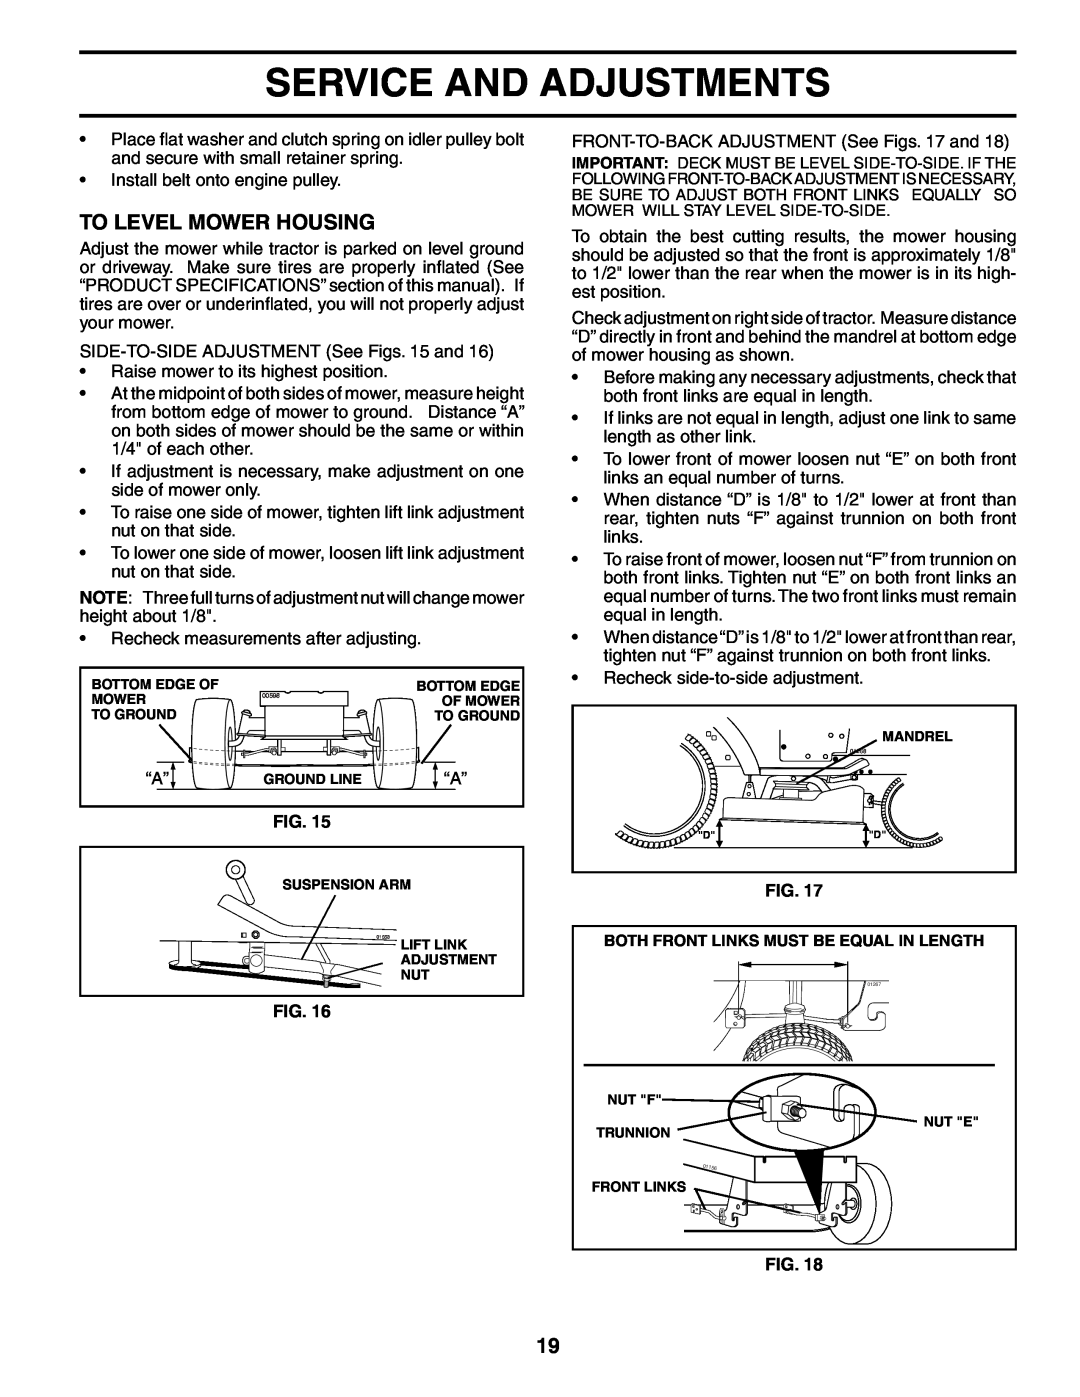 Husqvarna LT1536 owner manual To Level Mower Housing, Service And Adjustments 